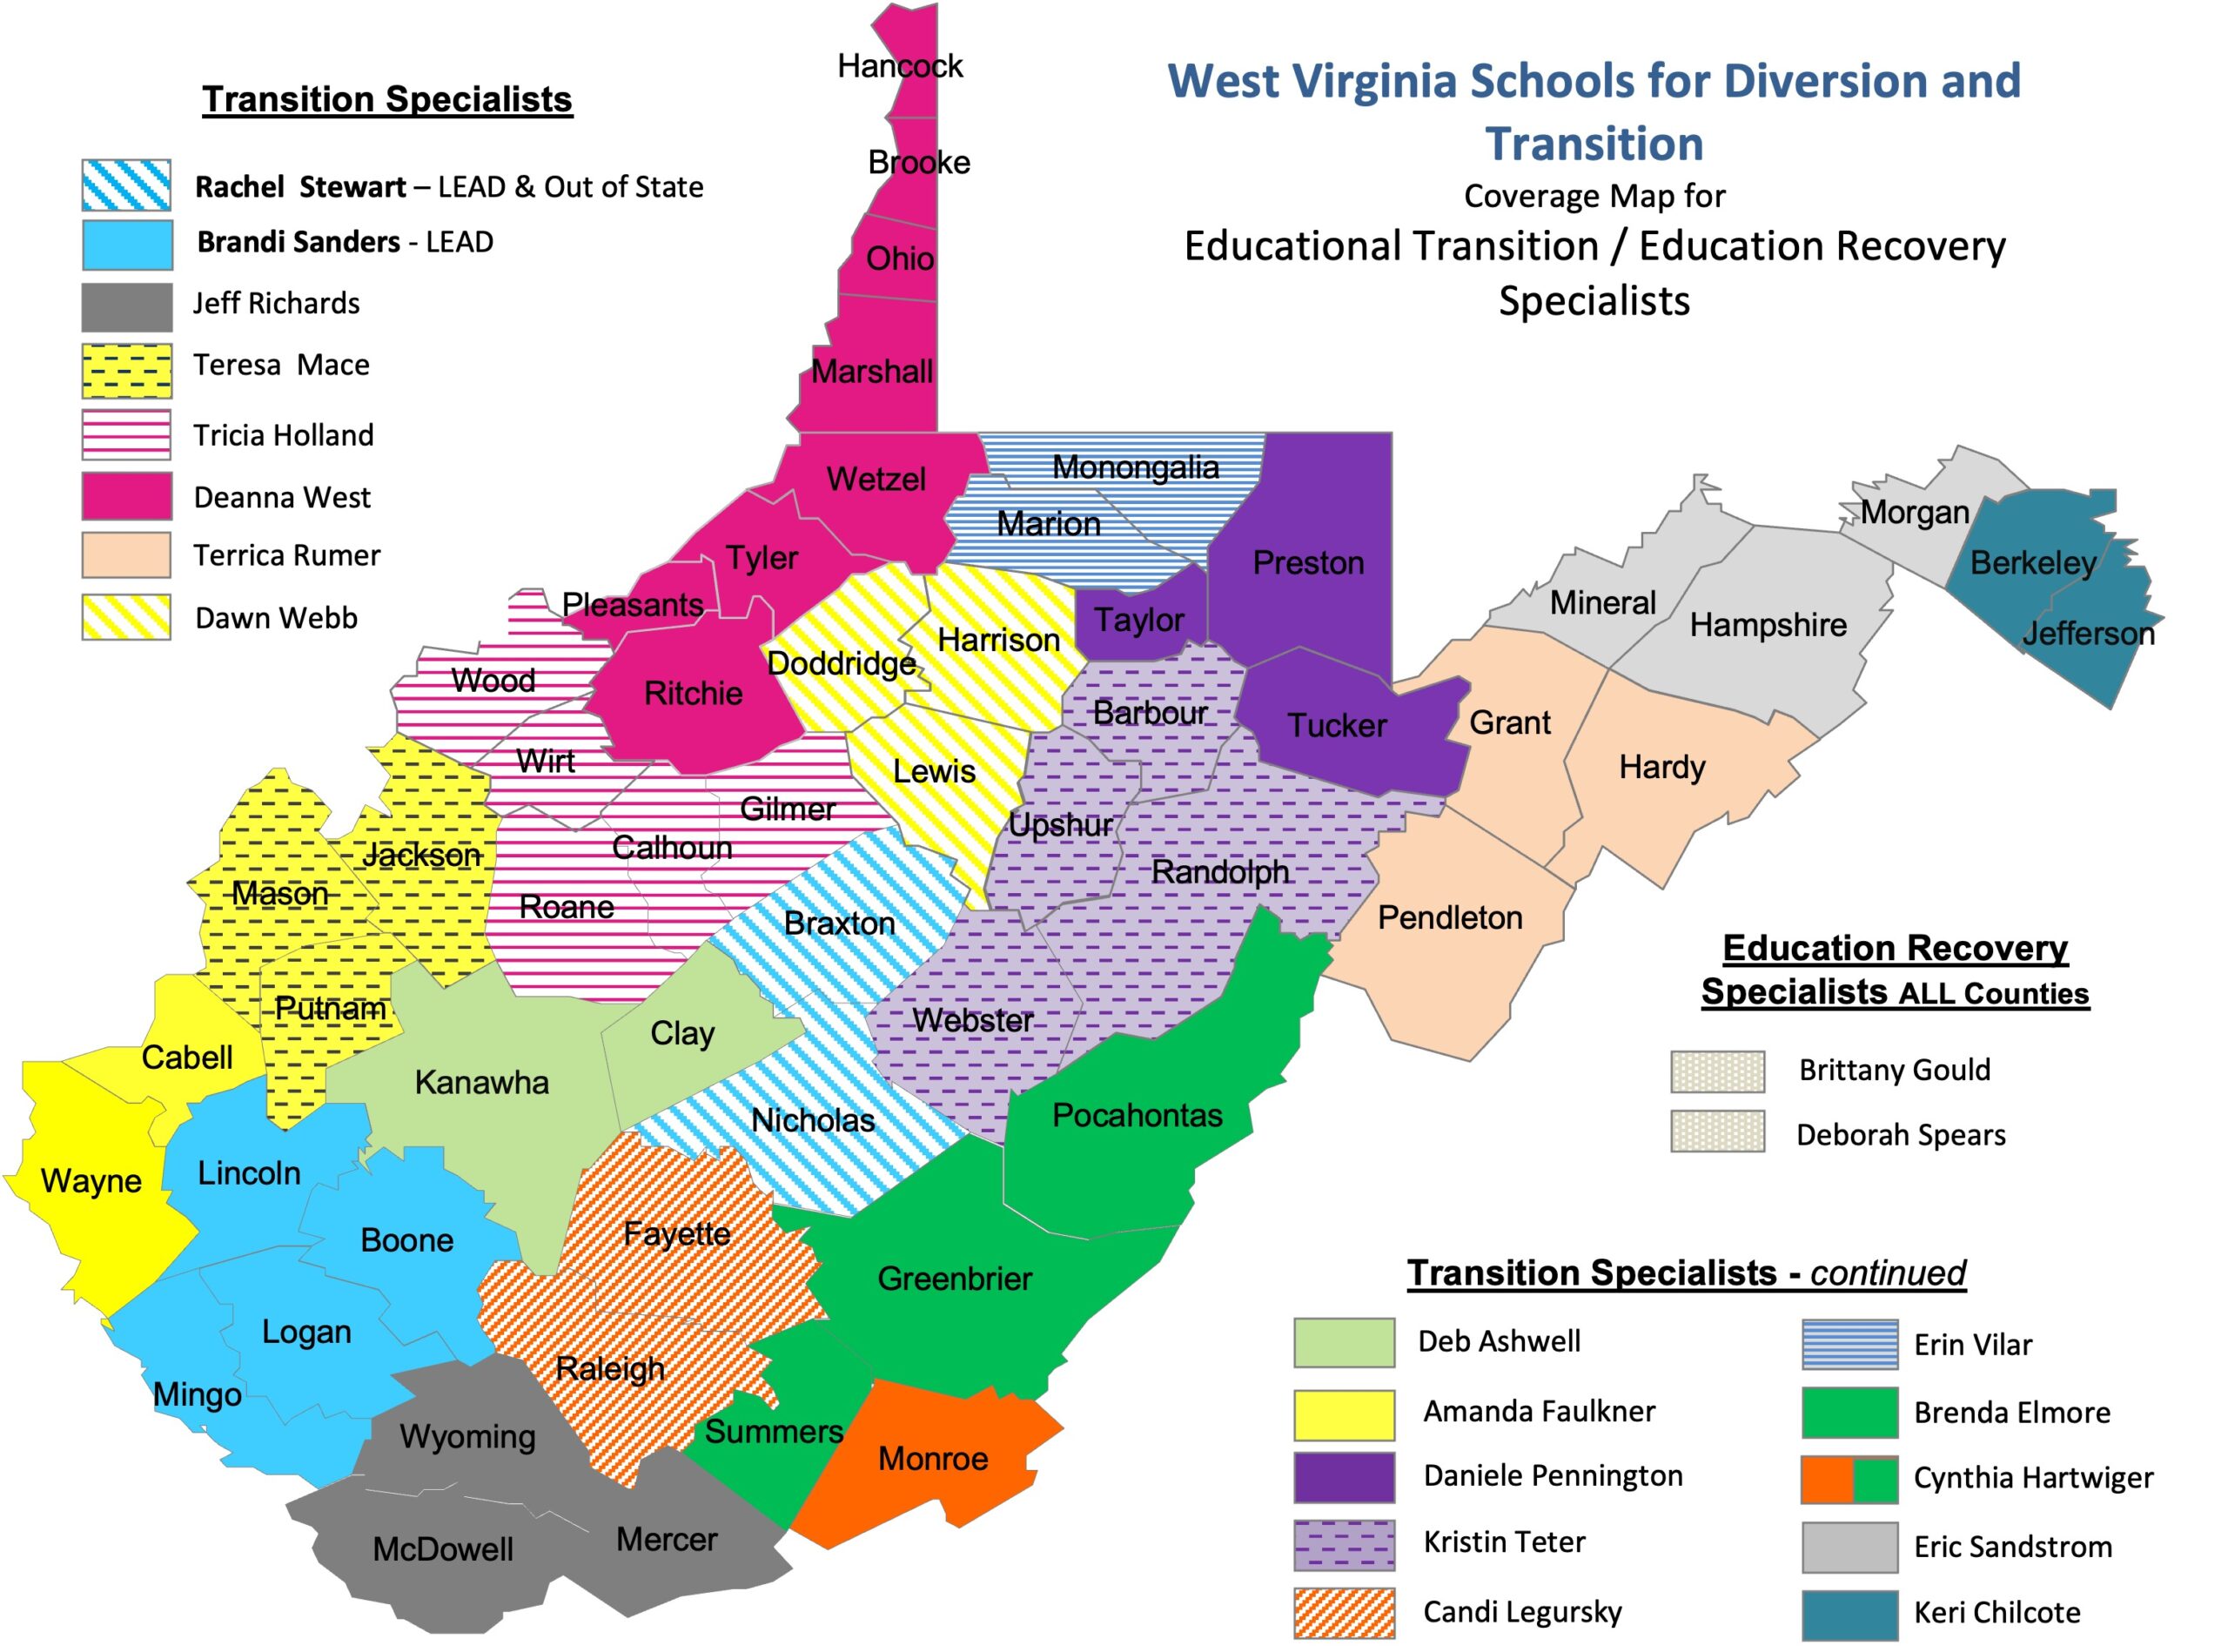 educational transition specialist coverage image